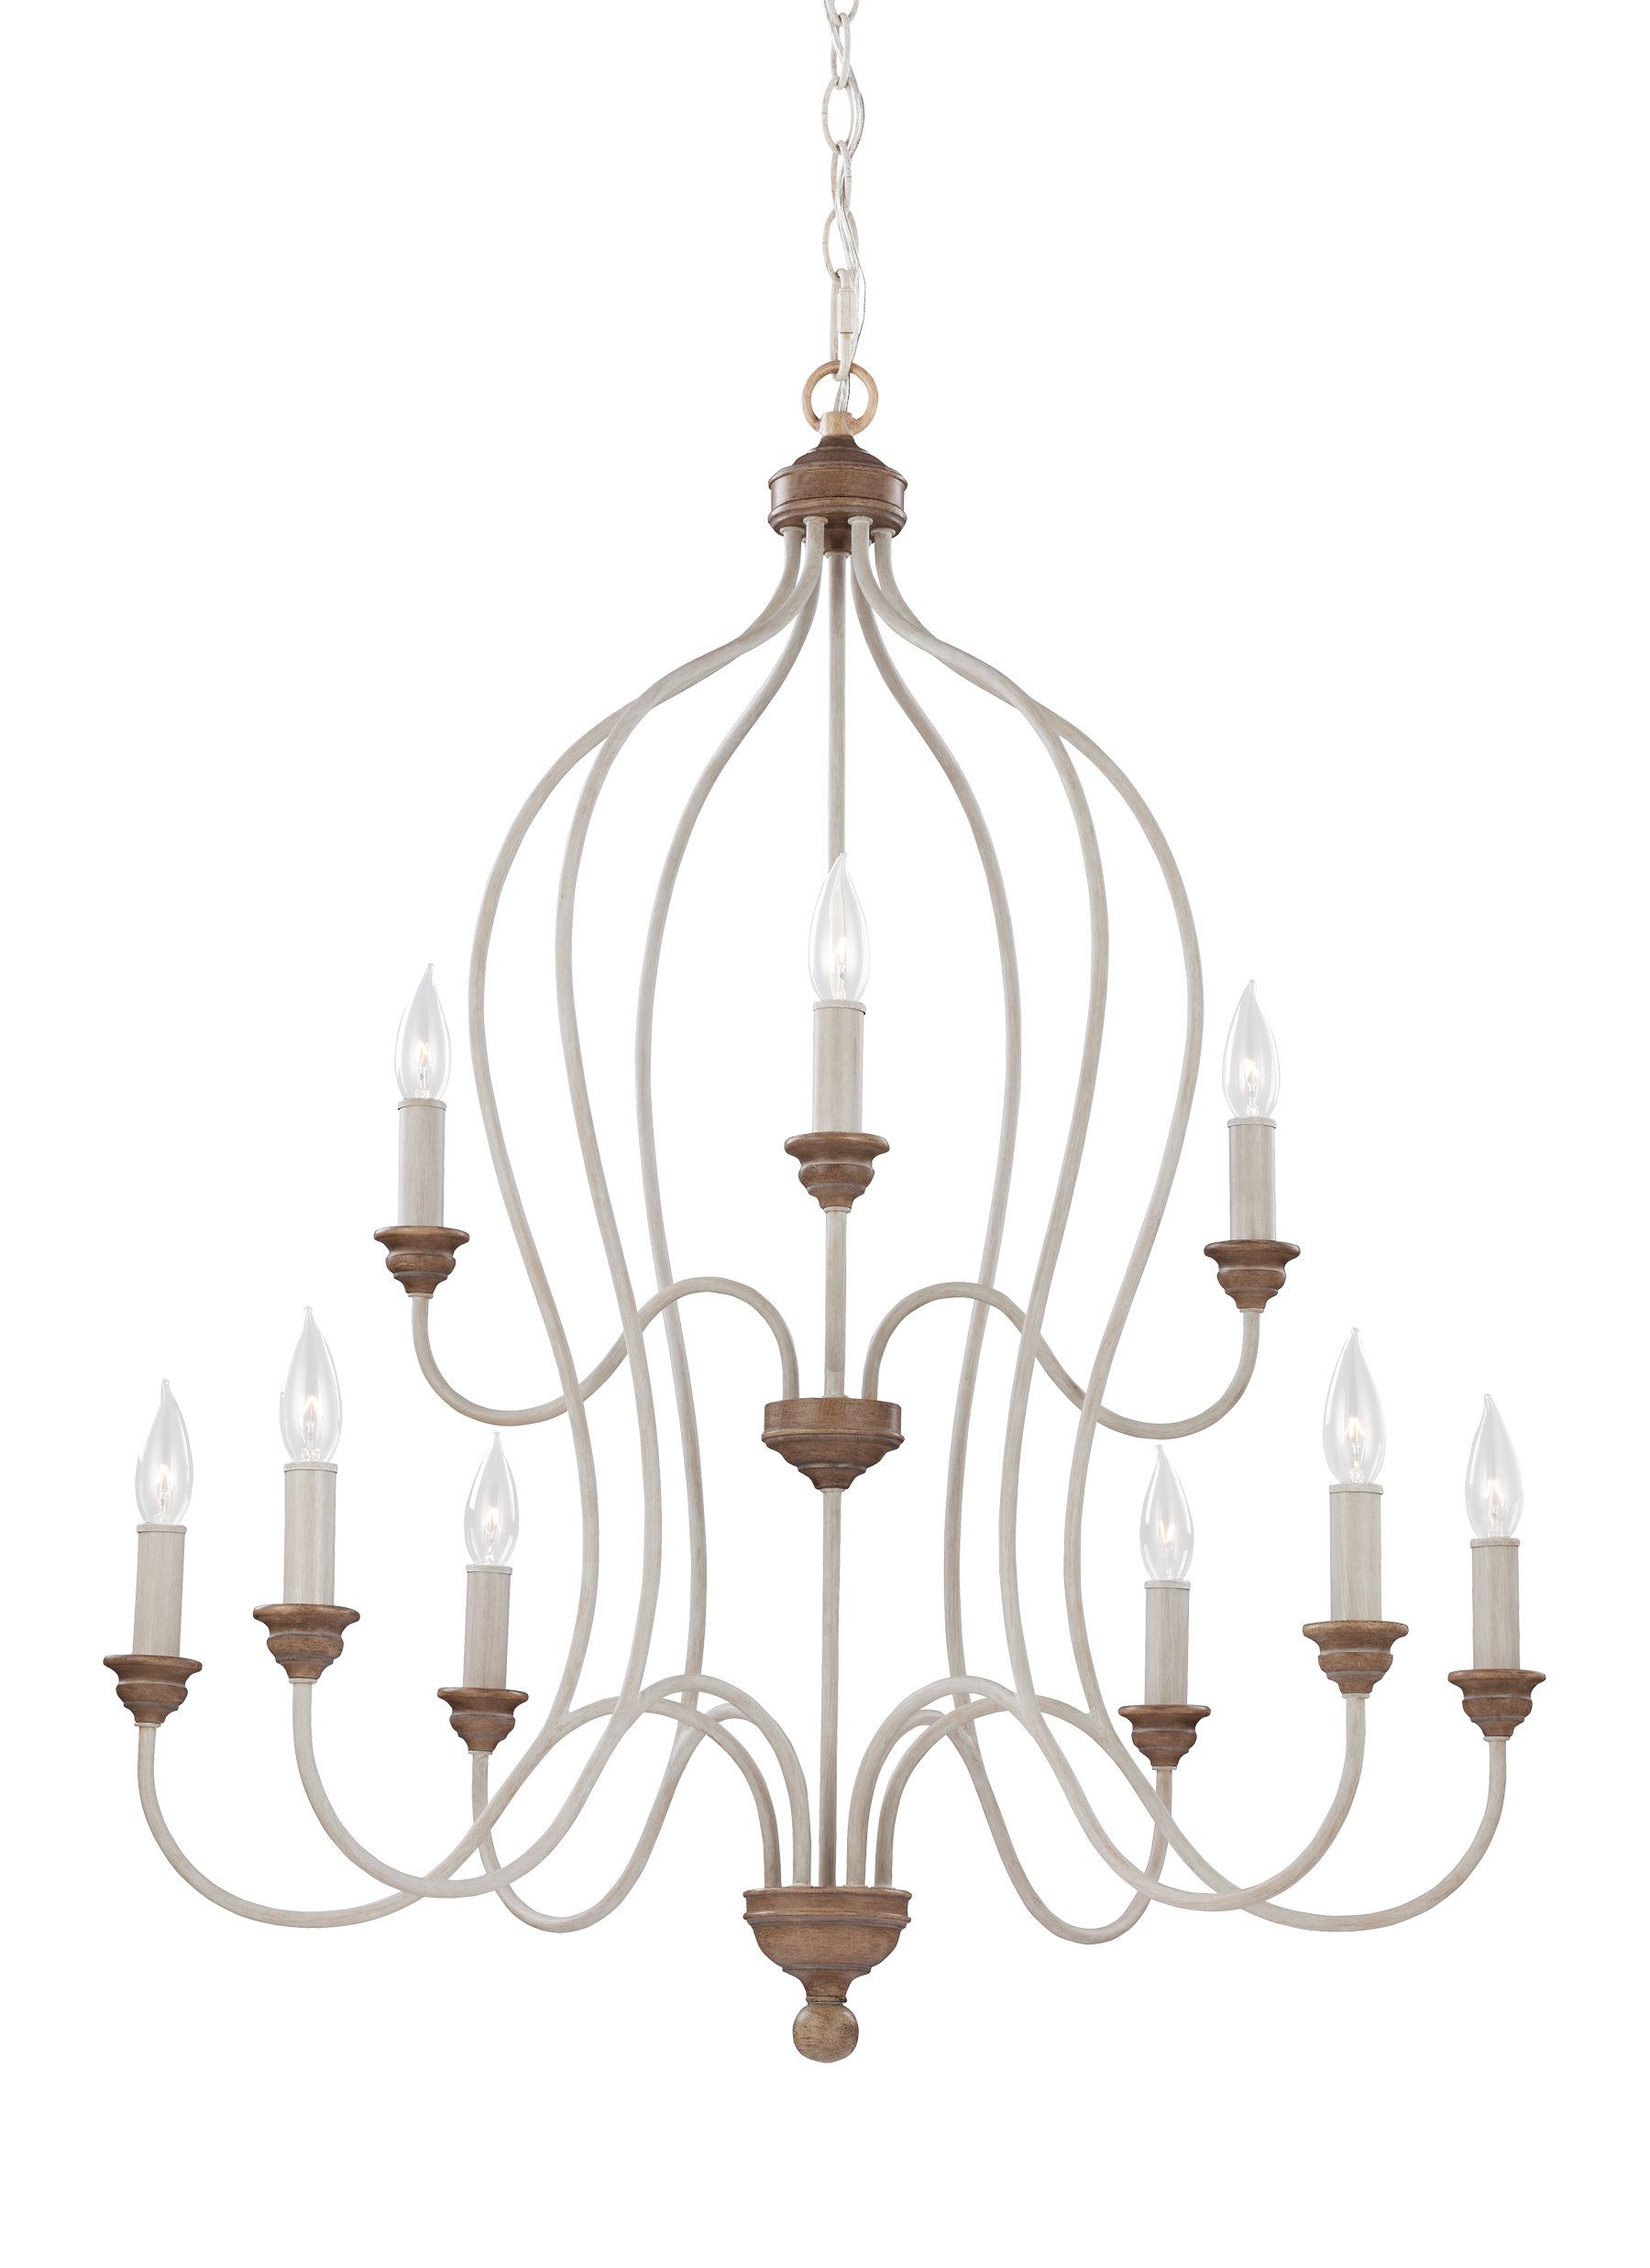 Sundberg 9 Light Candle Style Chandelier Pertaining To Trendy Watford 6 Light Candle Style Chandeliers (View 18 of 25)